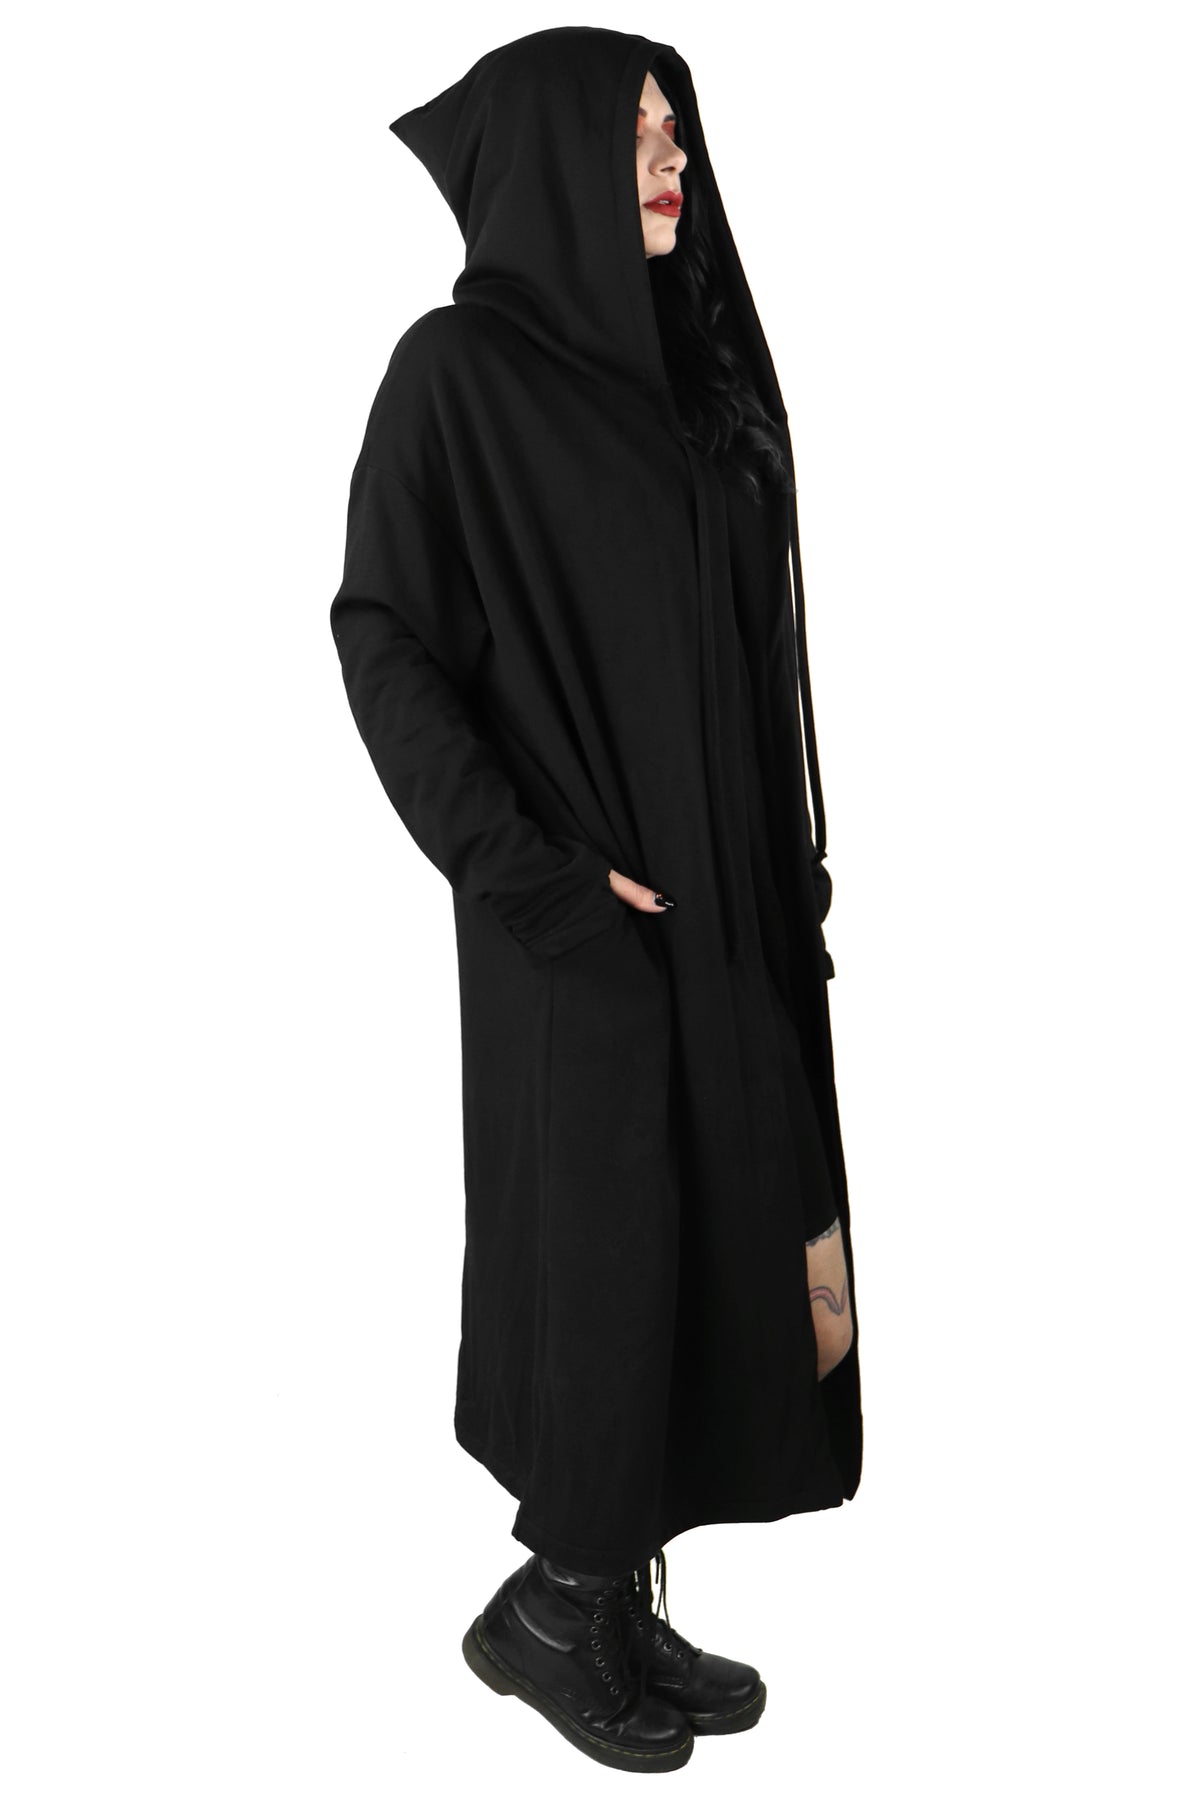 Bury A Friend Oversized Hooded Duster - Sign Up For Restock Notifications